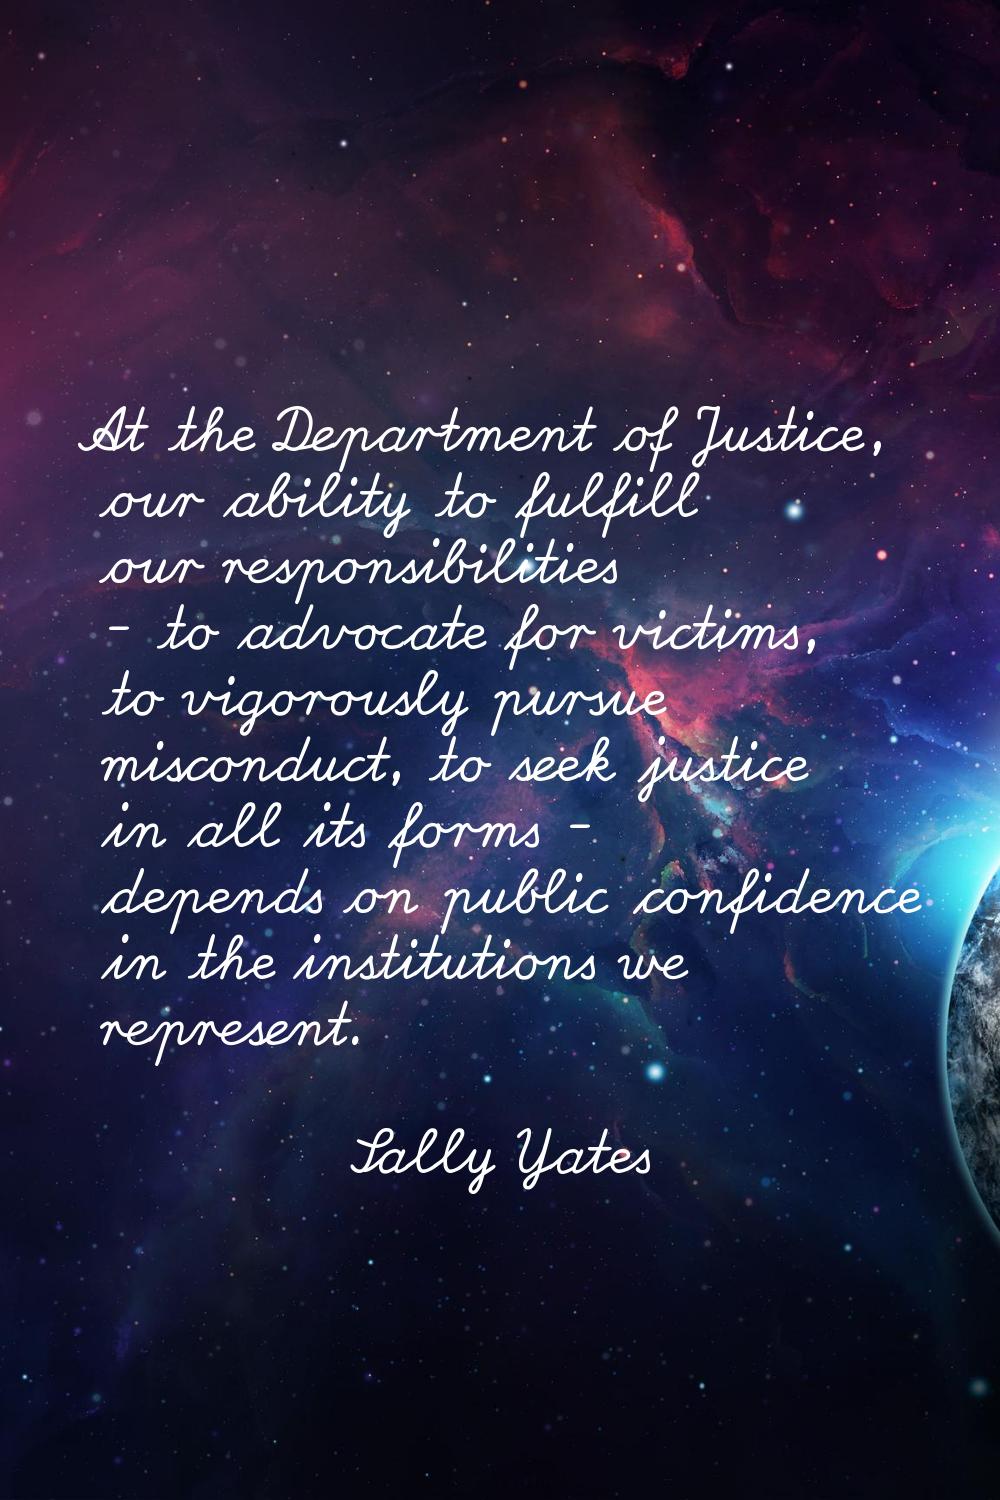 At the Department of Justice, our ability to fulfill our responsibilities - to advocate for victims